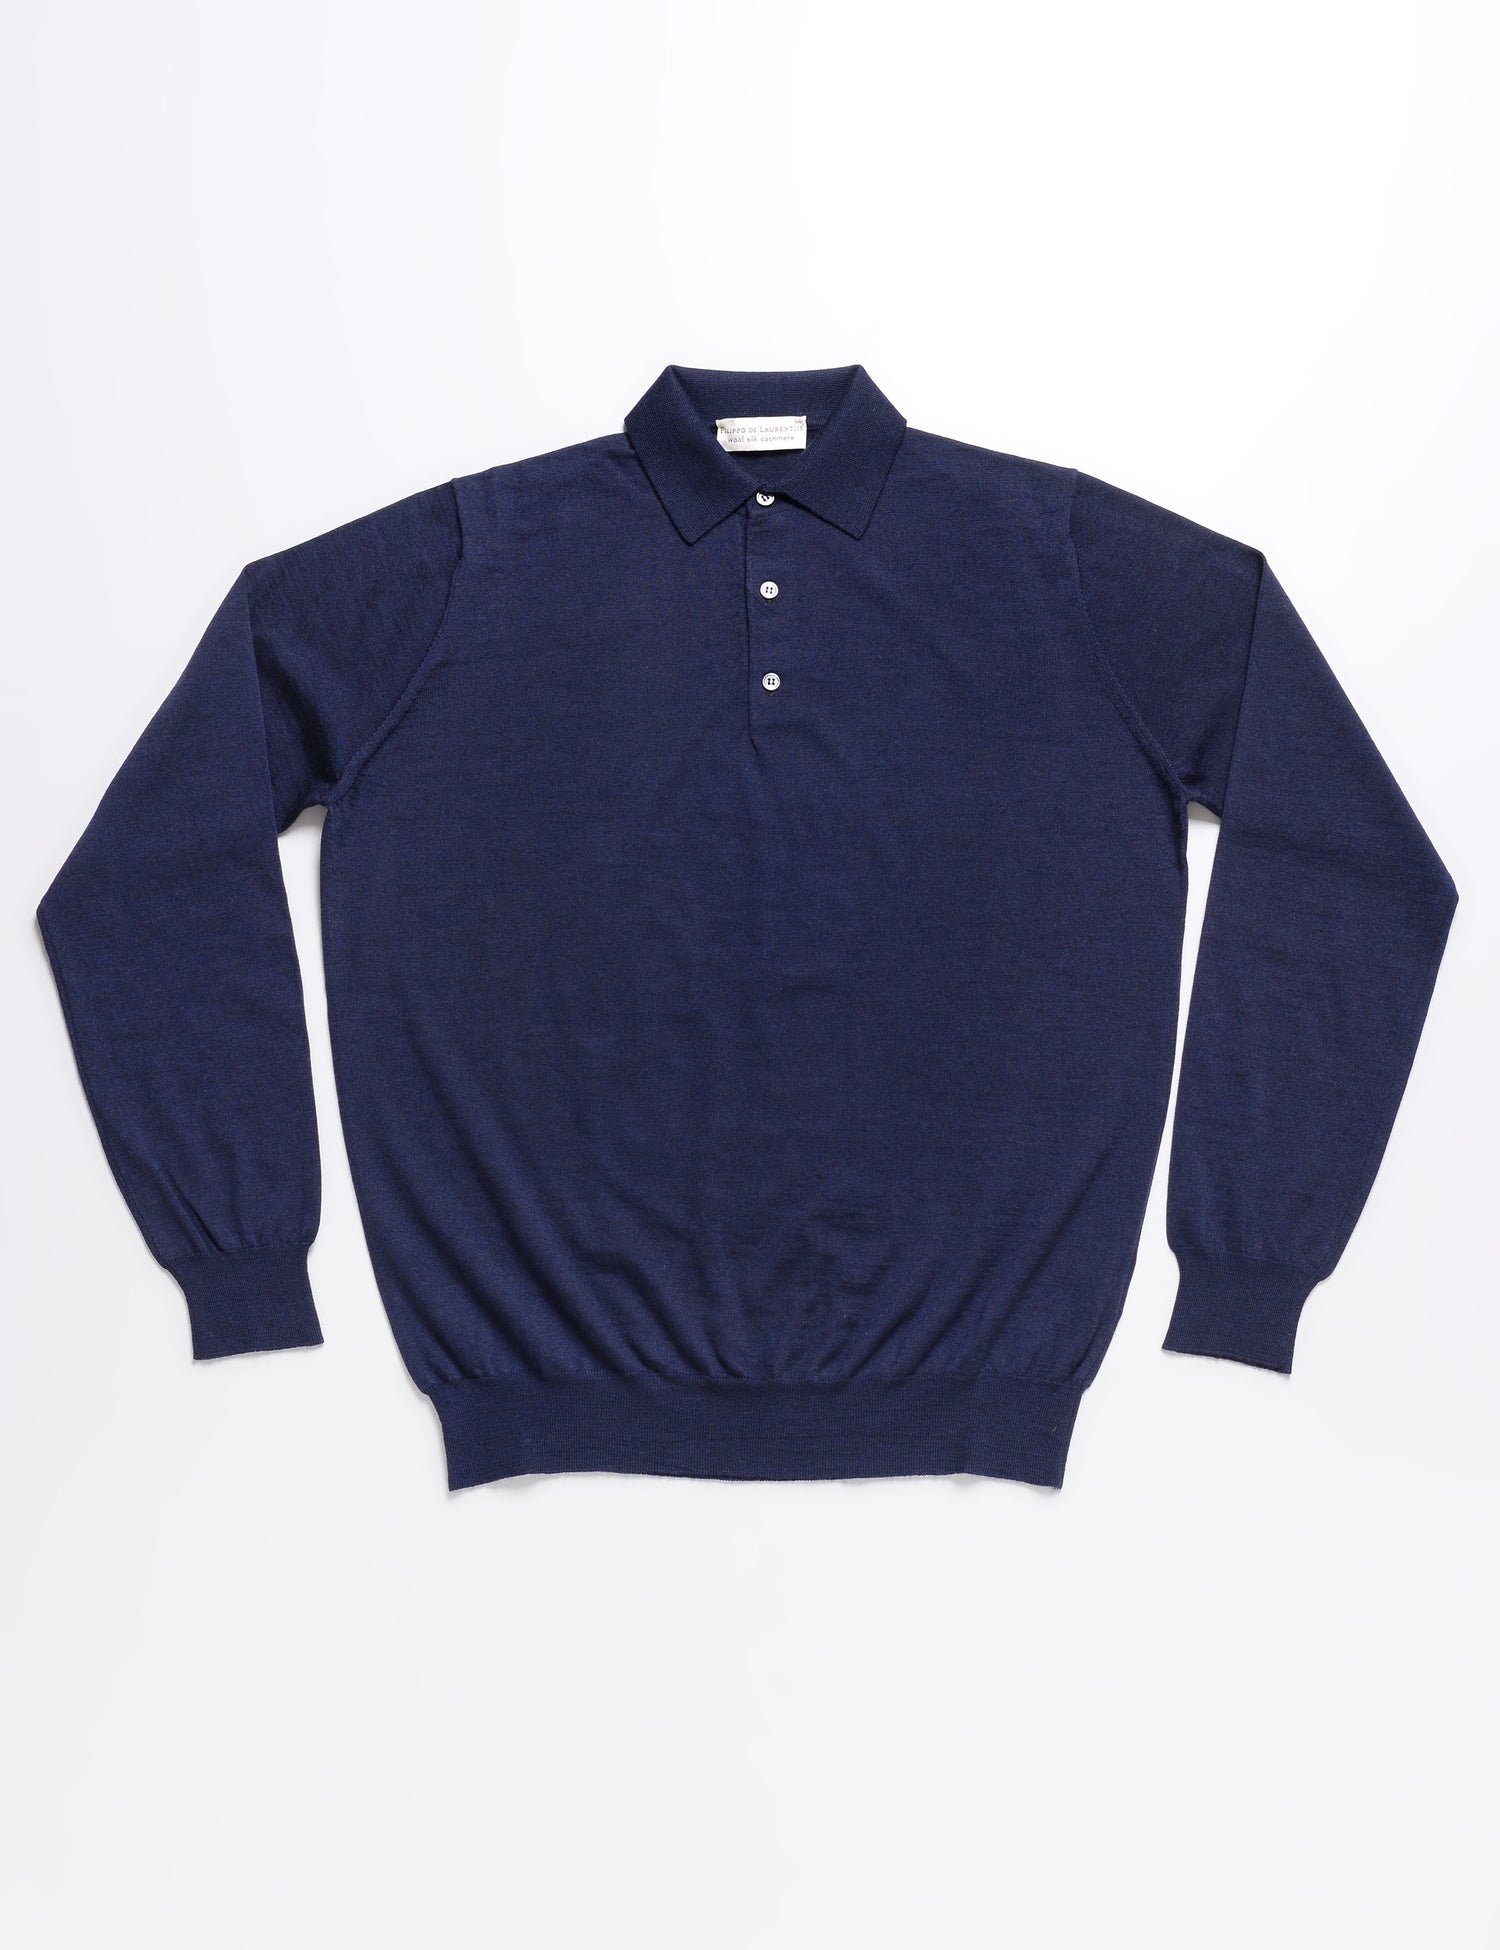 Long Sleeved Polo in Wool, Silk, and Cashmere Blend - Navy